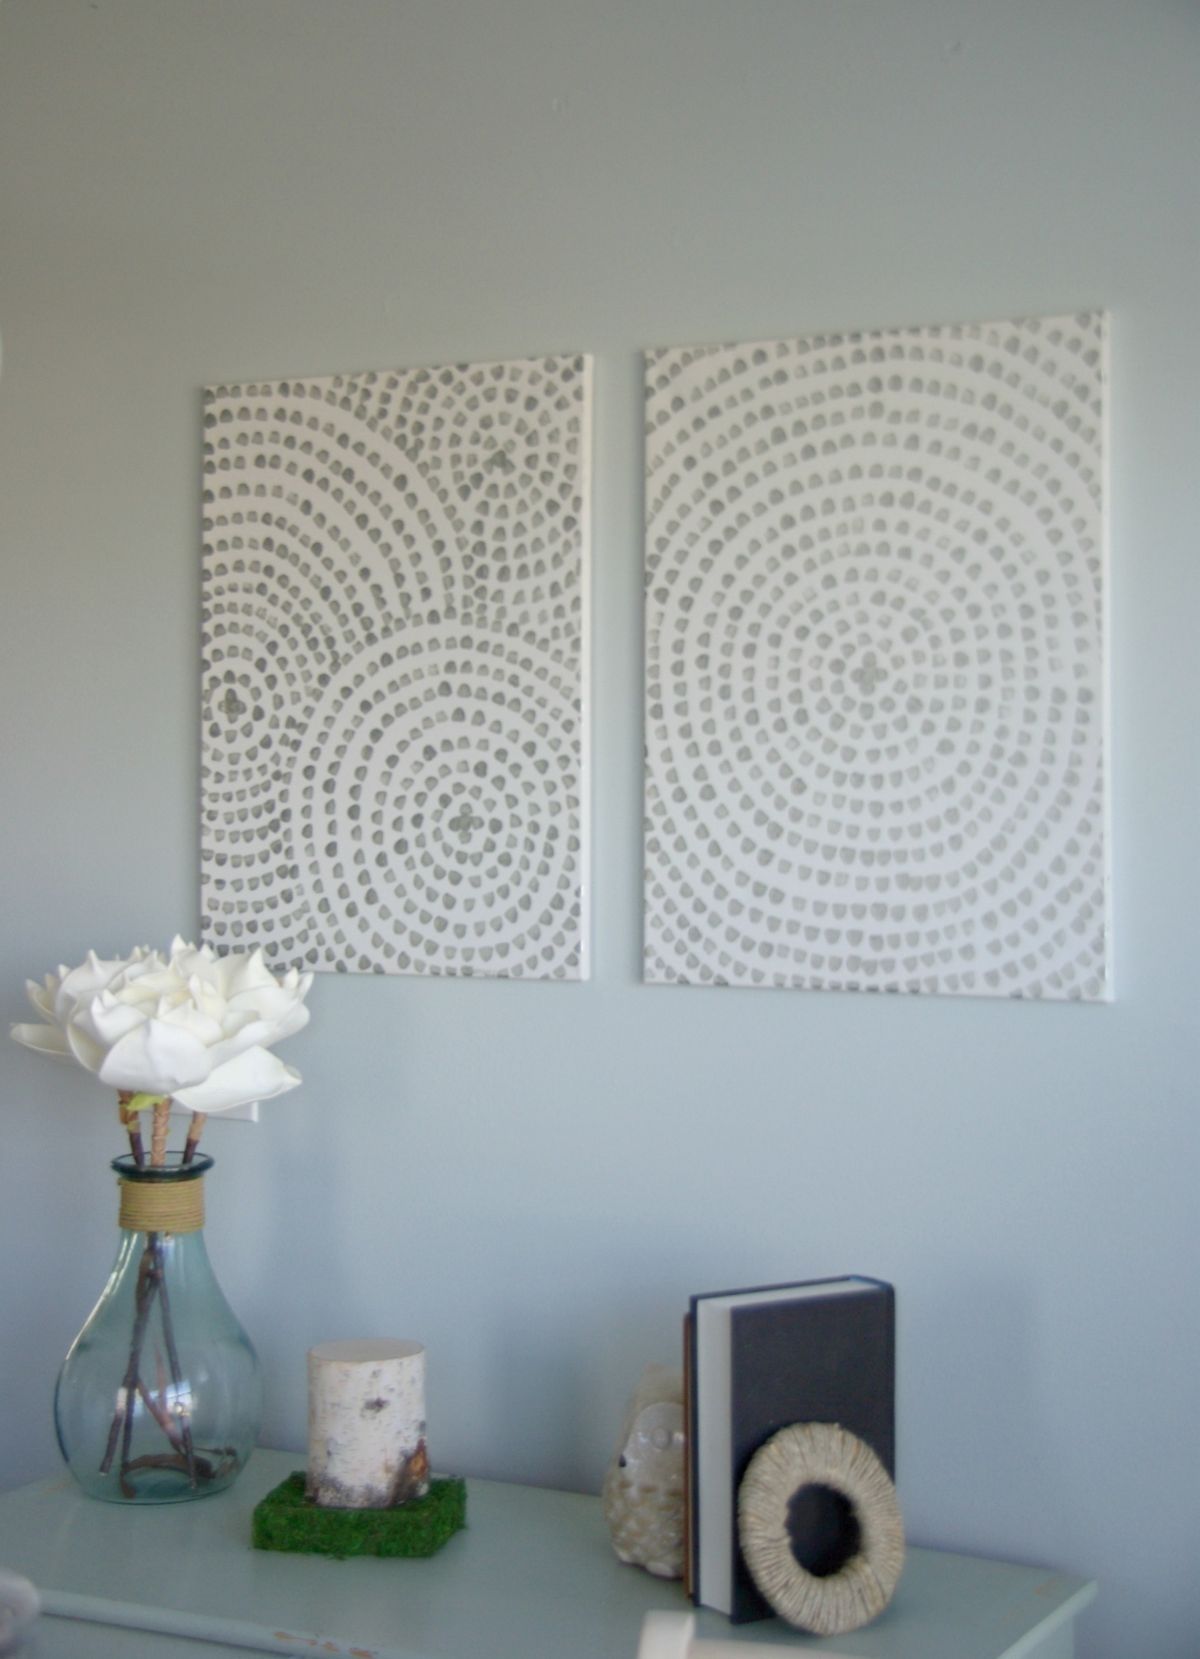 Diy Canvas Wall Art – A Low Cost Way To Add Art To Your Home | My Pertaining To Gray Canvas Wall Art (View 6 of 20)